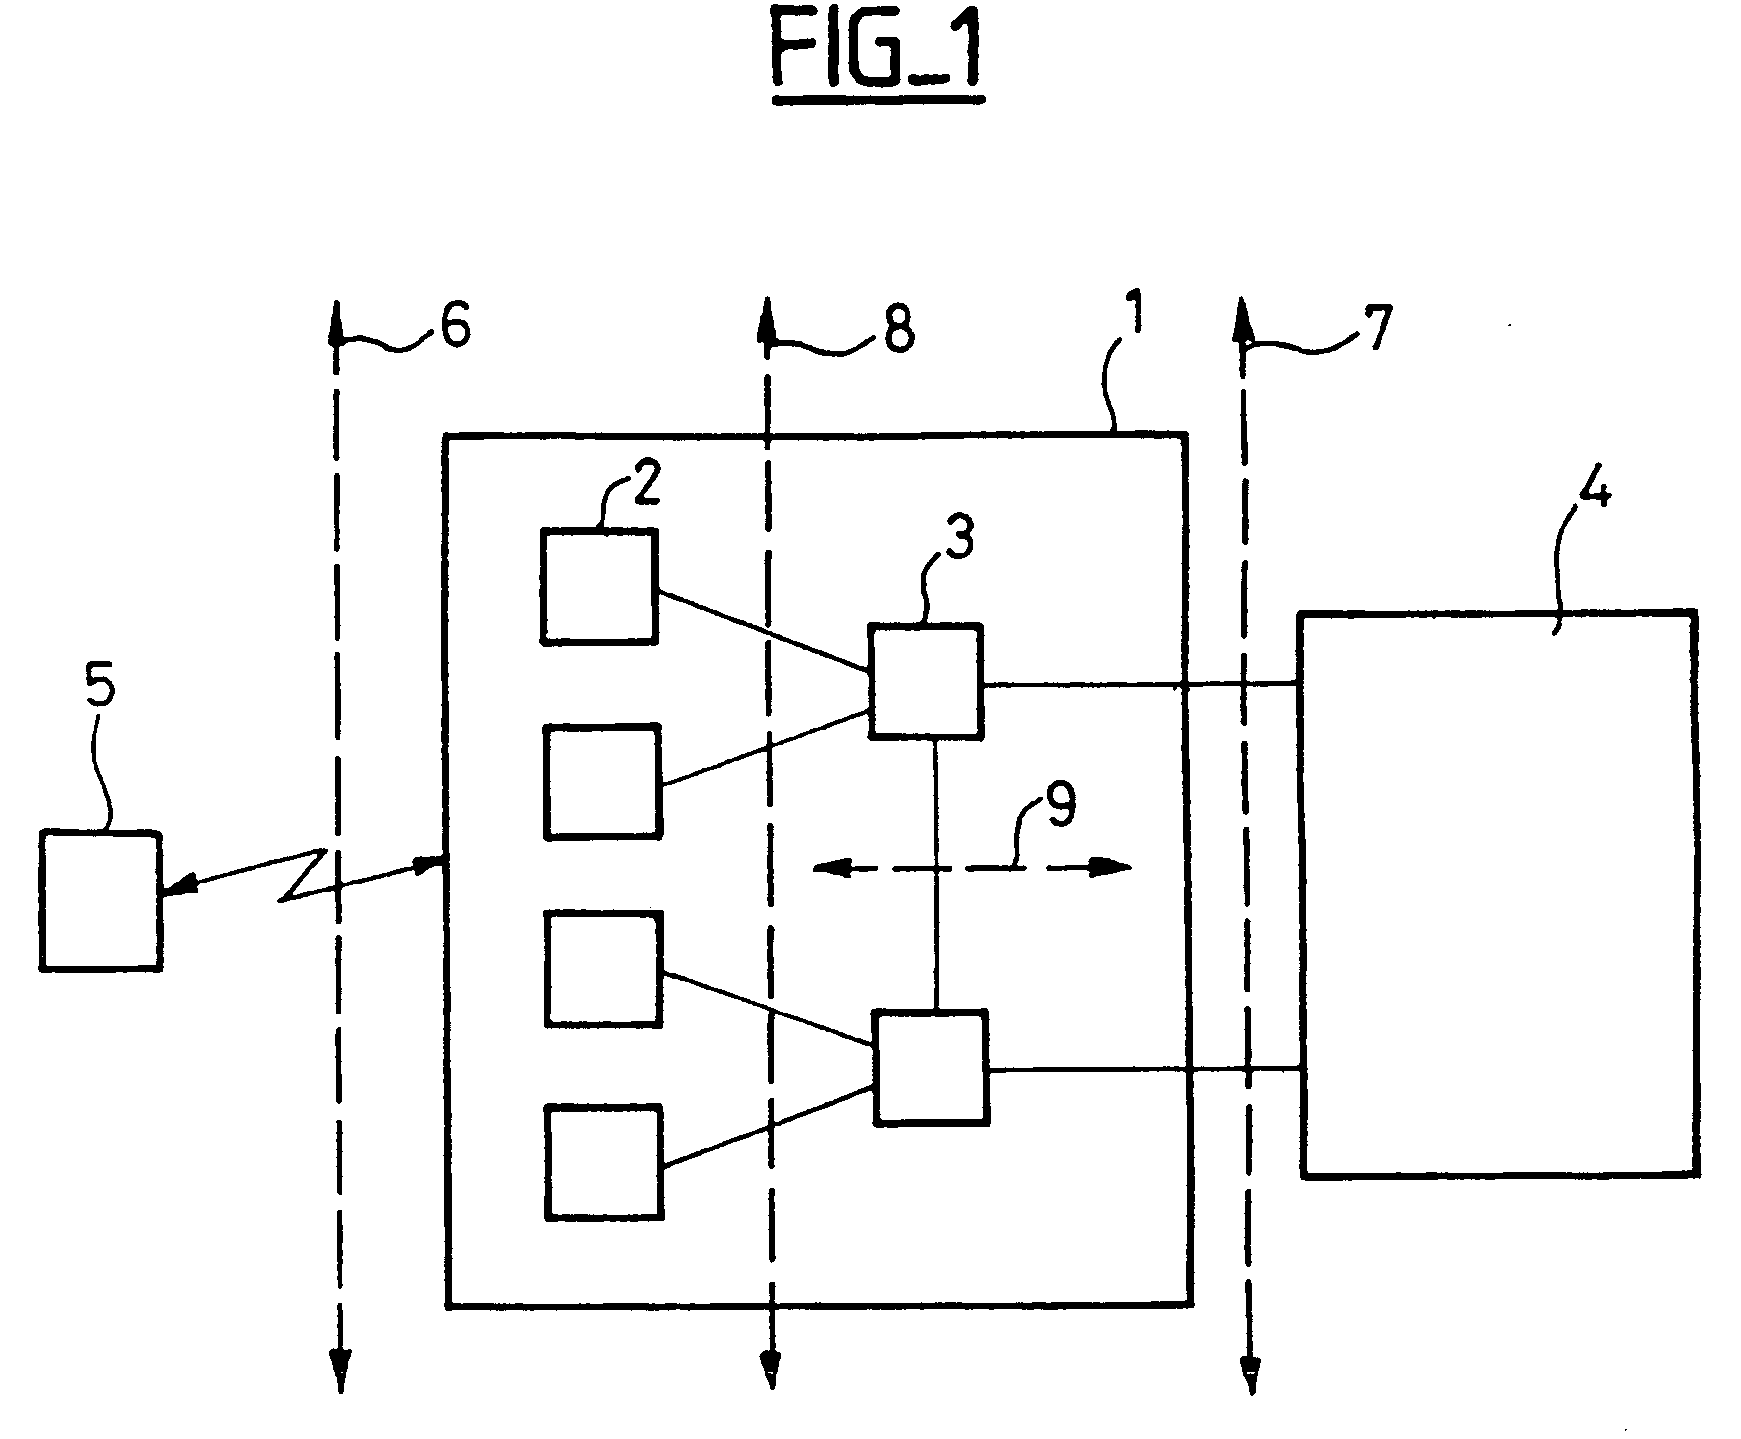 Method of protecting the integrity of messages sent in a mobile radio system